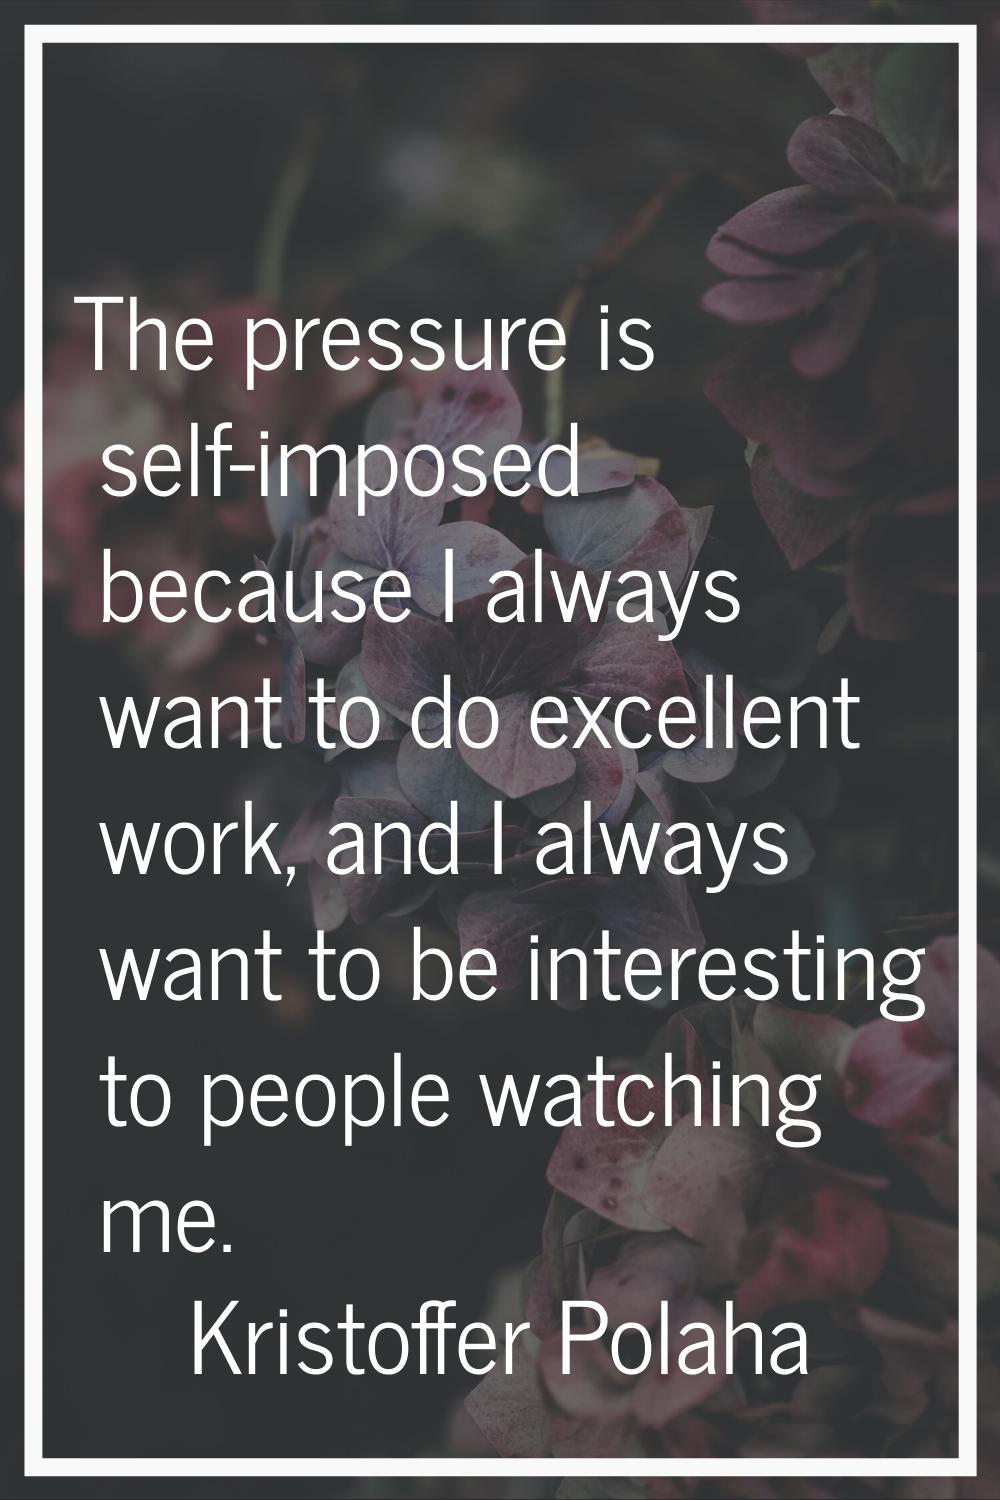 The pressure is self-imposed because I always want to do excellent work, and I always want to be in